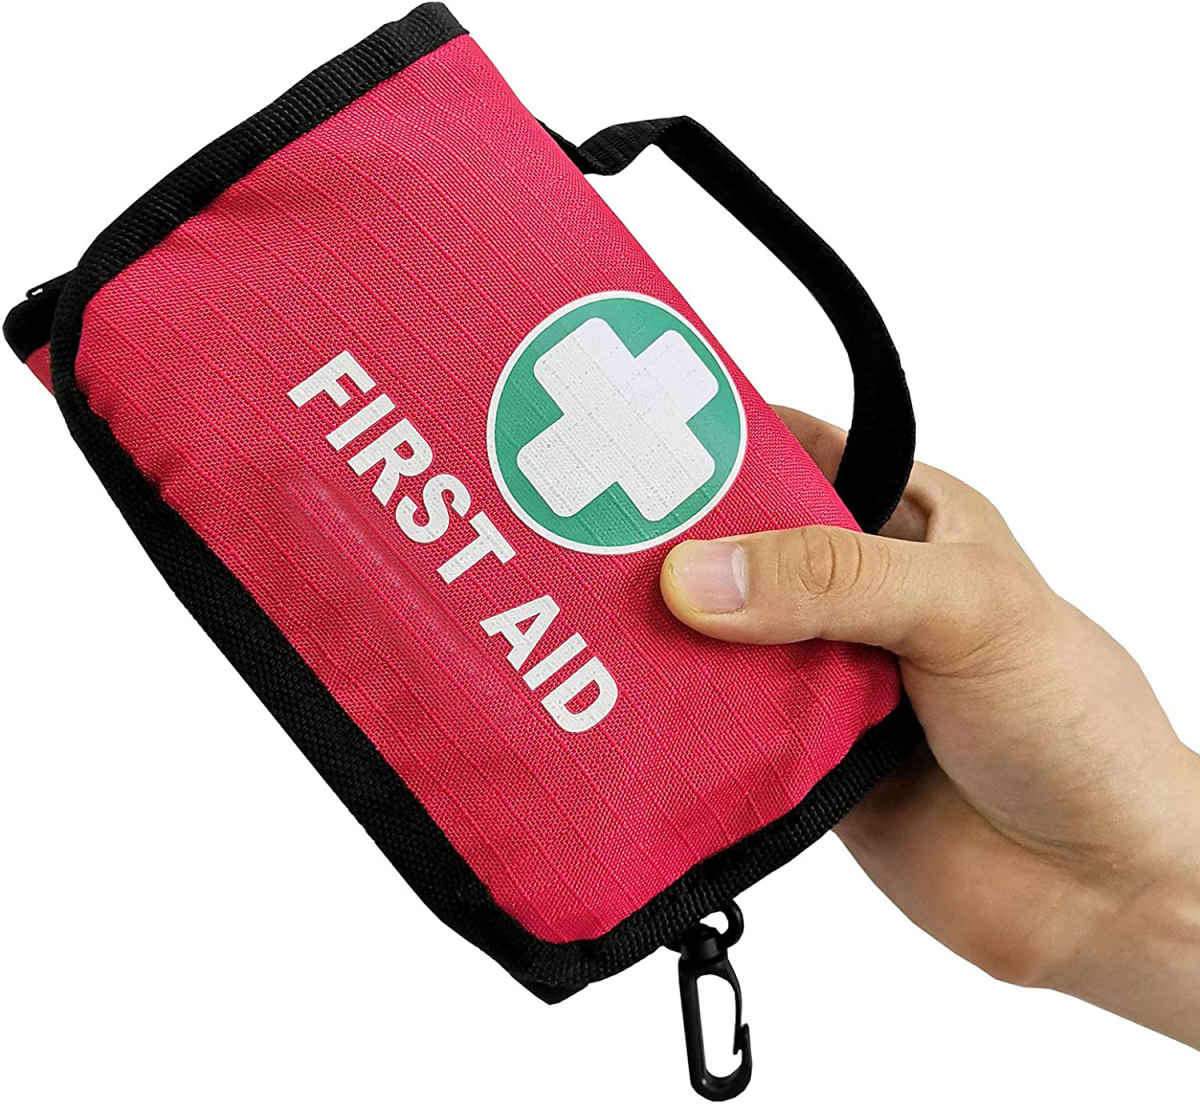 What are the features and uses of Small First Aid Grab Bag?